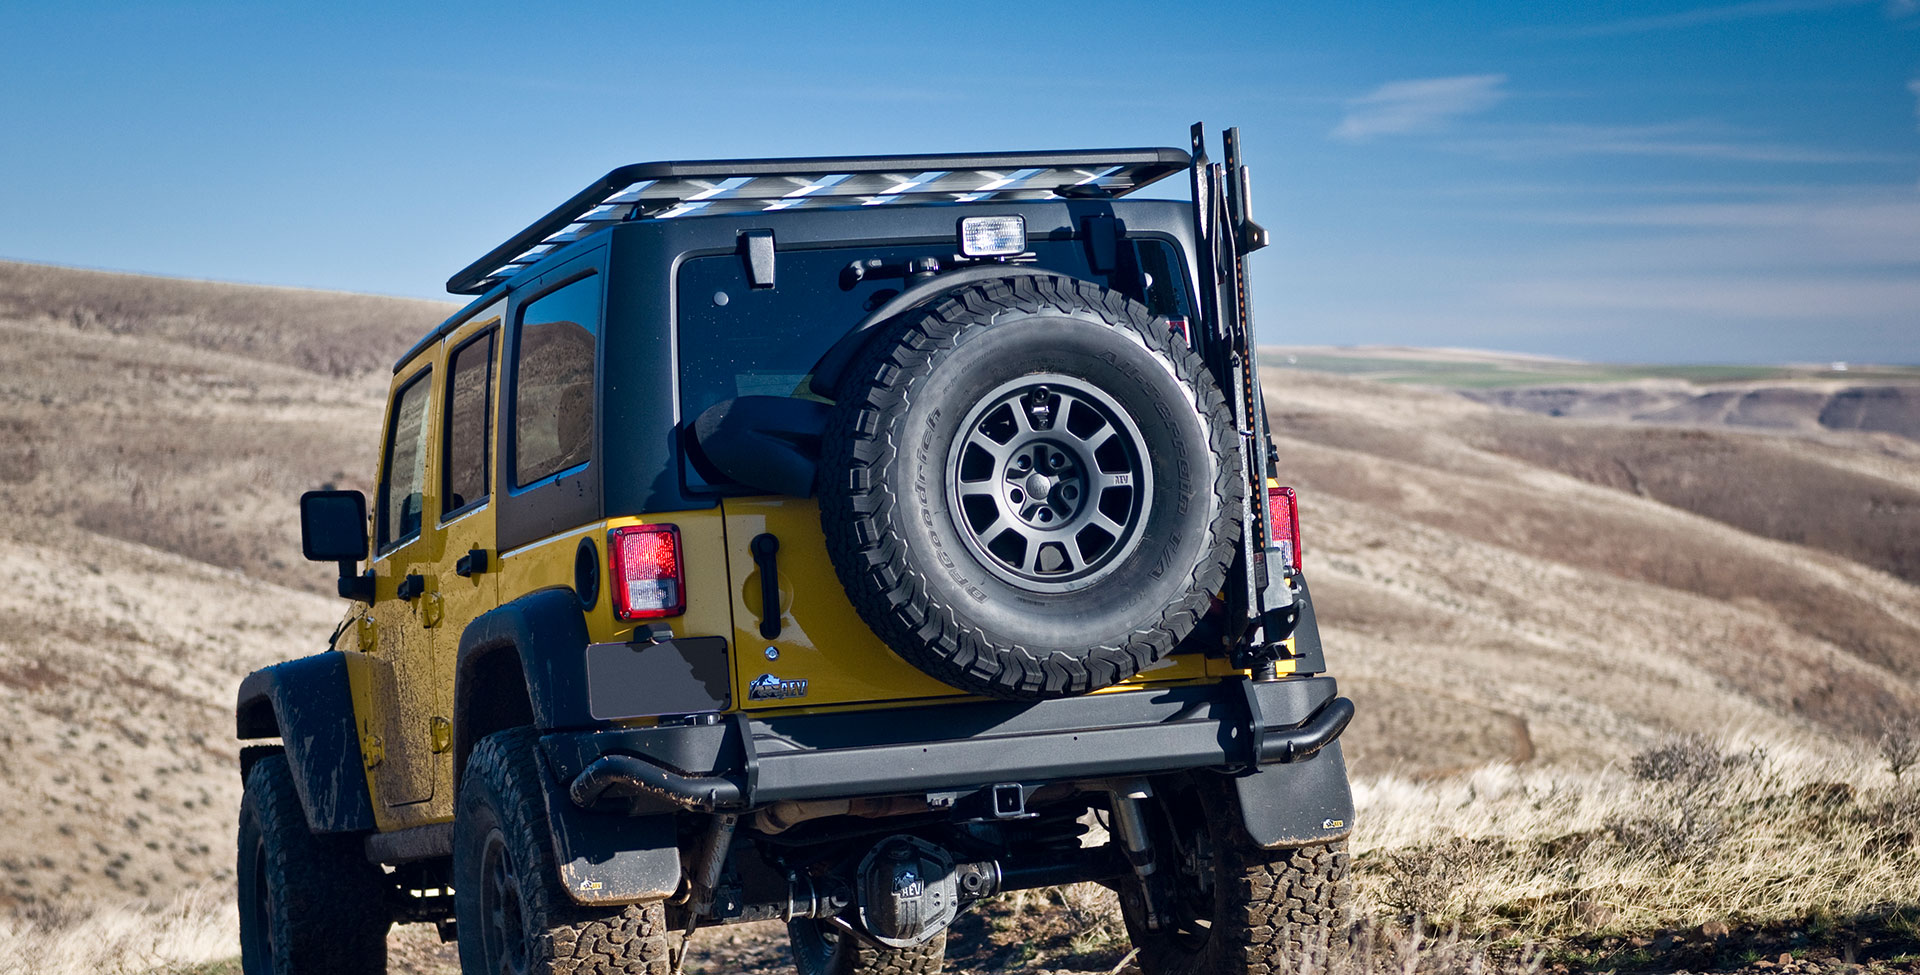 JK Rear Bumper / Tire Carrier - American Expedition Vehicles - AEV